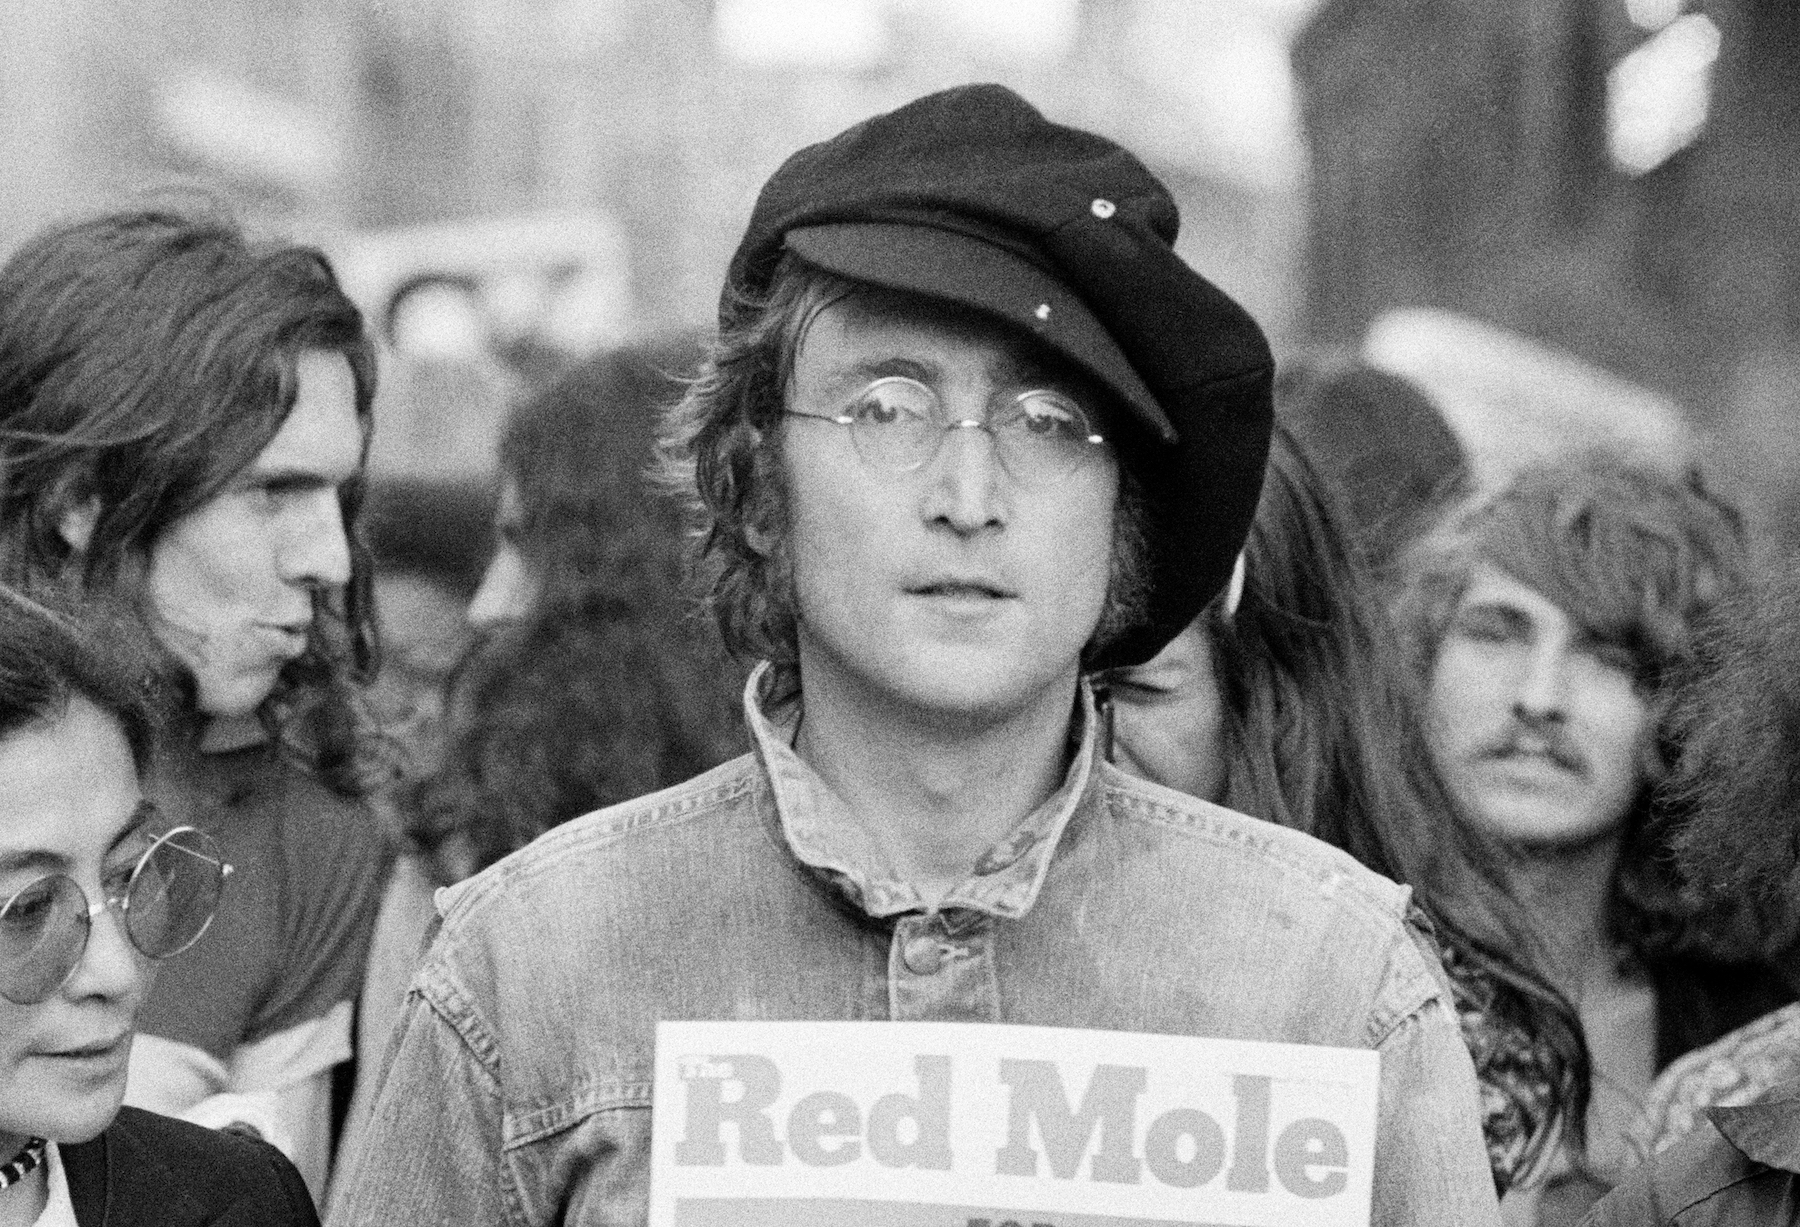 Portrait of British musician John Lennon (1940 - 1980) and his wife, artist and musician Yoko Ono at an unspecified rally Rowland